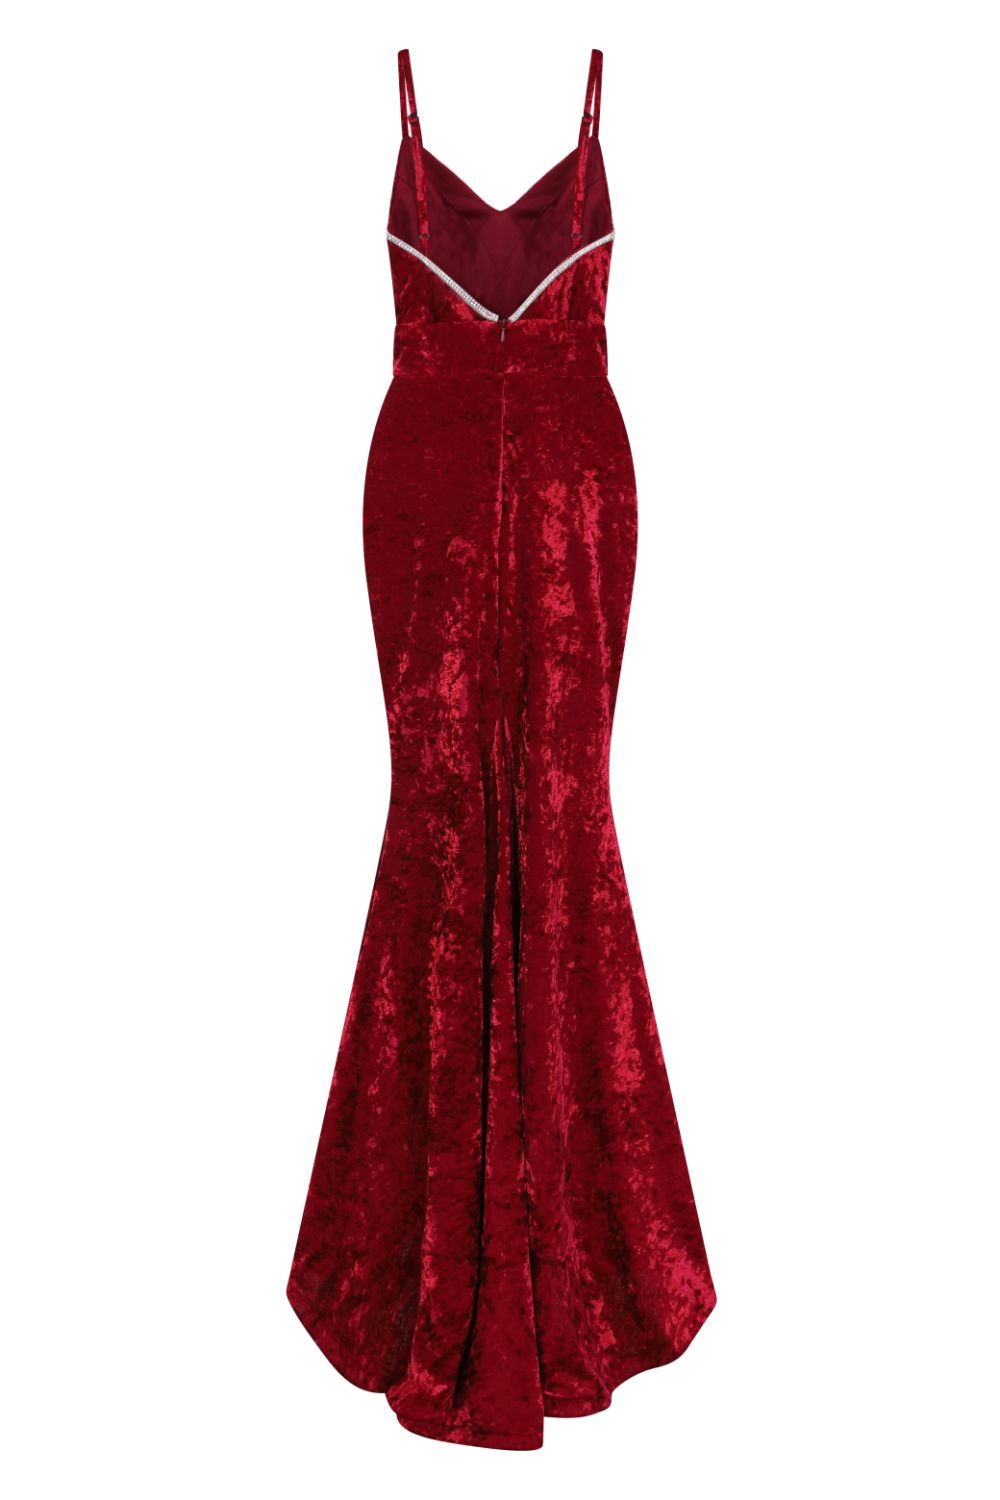 Irreplaceable Luxe Ruby Red Velvet Crystal Sweetheart Fishtail Gown